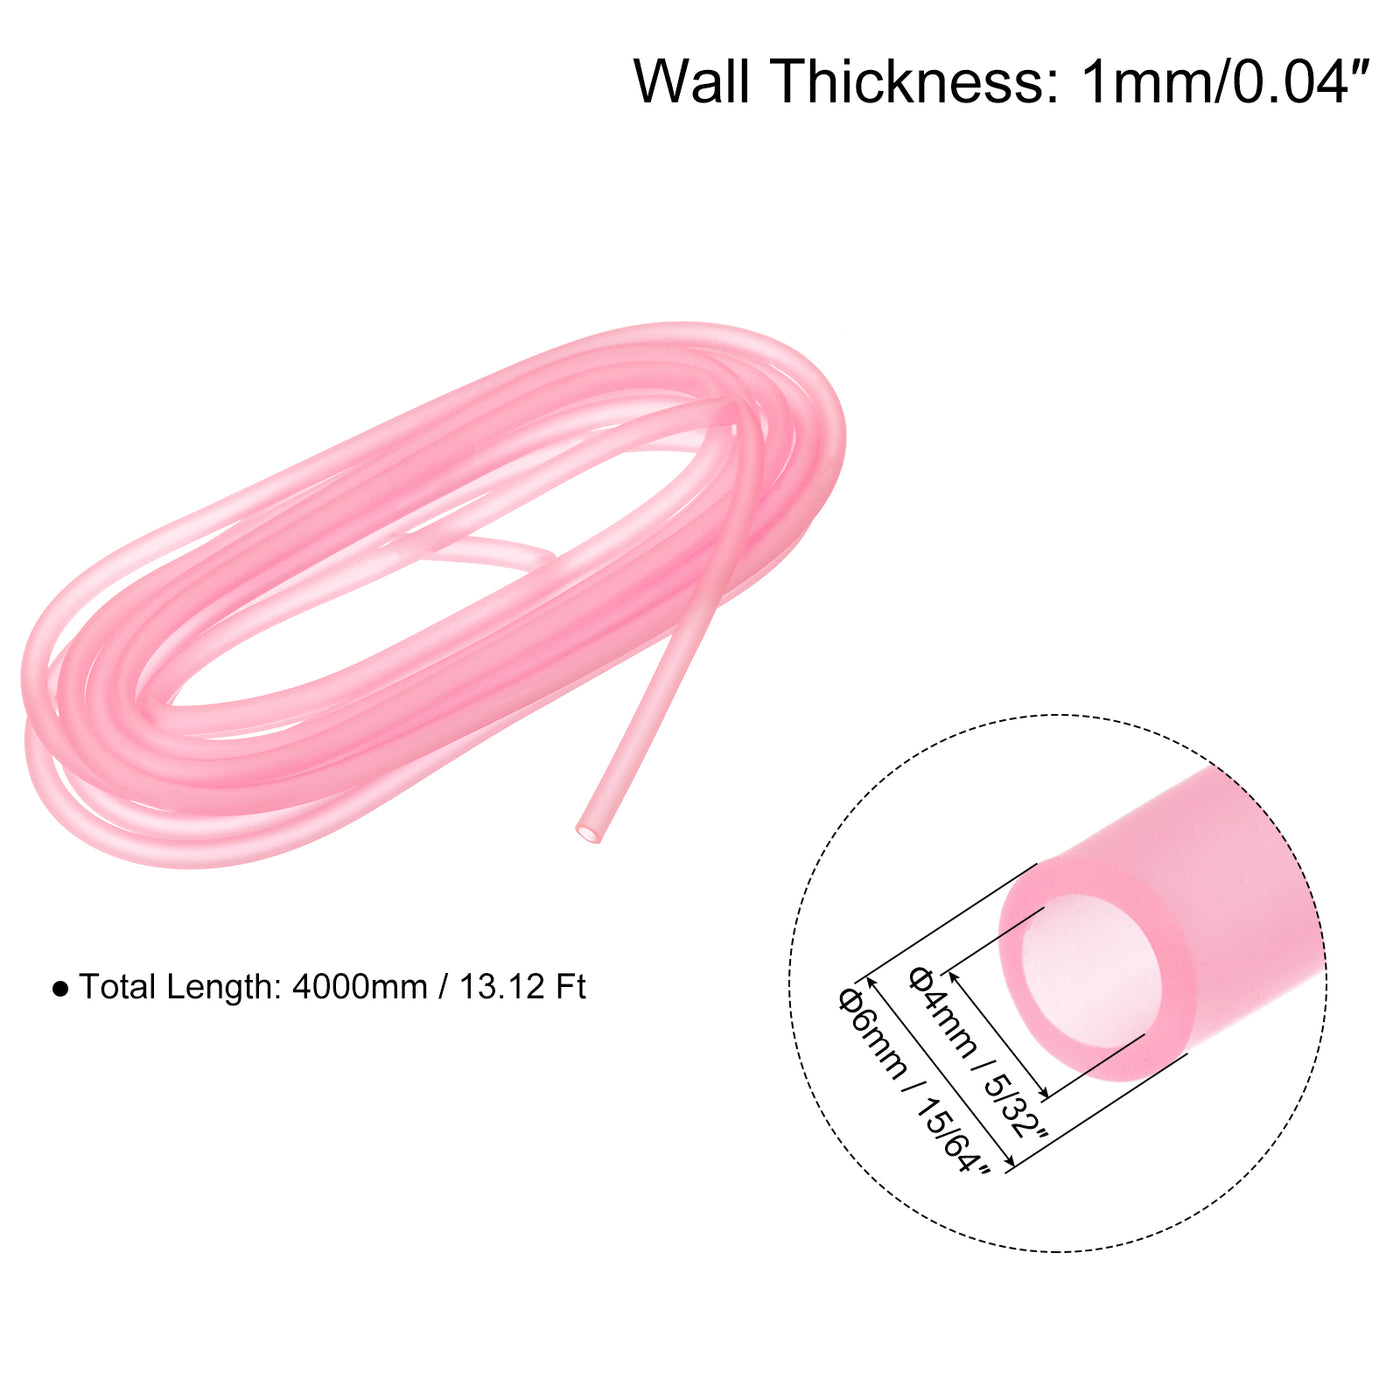 uxcell Uxcell Silicone Tubing 5/32" ID, 15/64" OD 4Pcs 13.12 Ft for Pump Transfer, Pink